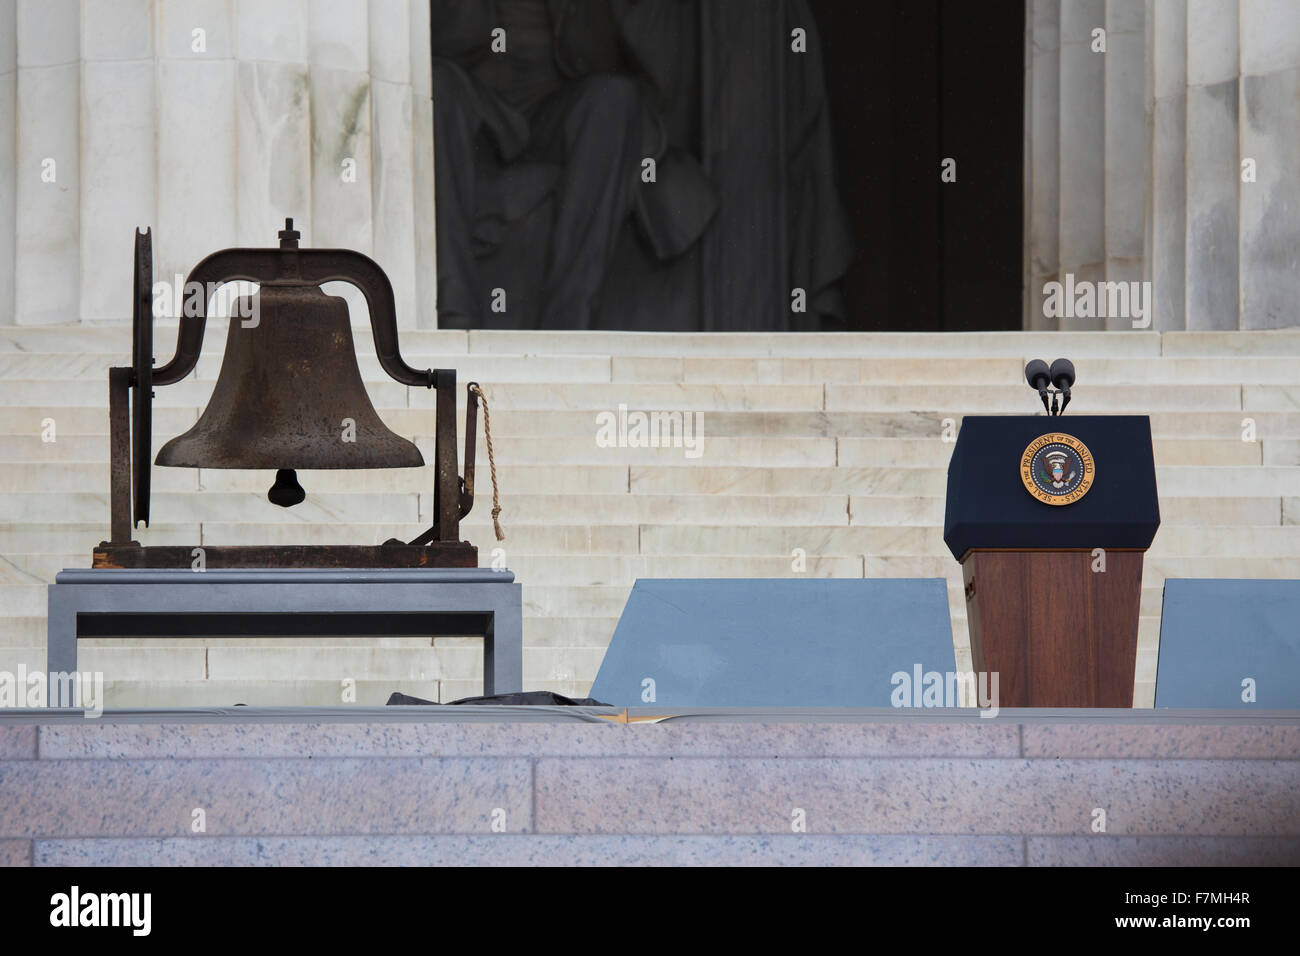 Empty Presidential Podium with Seal with Bell from the Birgmingham Church, Alabama, at the Let Freedom Ring ceremony on the steps of the Lincoln Memorial August 28, 2013 in Washington, DC, commemorating the 50th anniversary of Dr. Martin Luther King Jr.'s 'I Have a Dream' speech and the March on Washington. Stock Photo